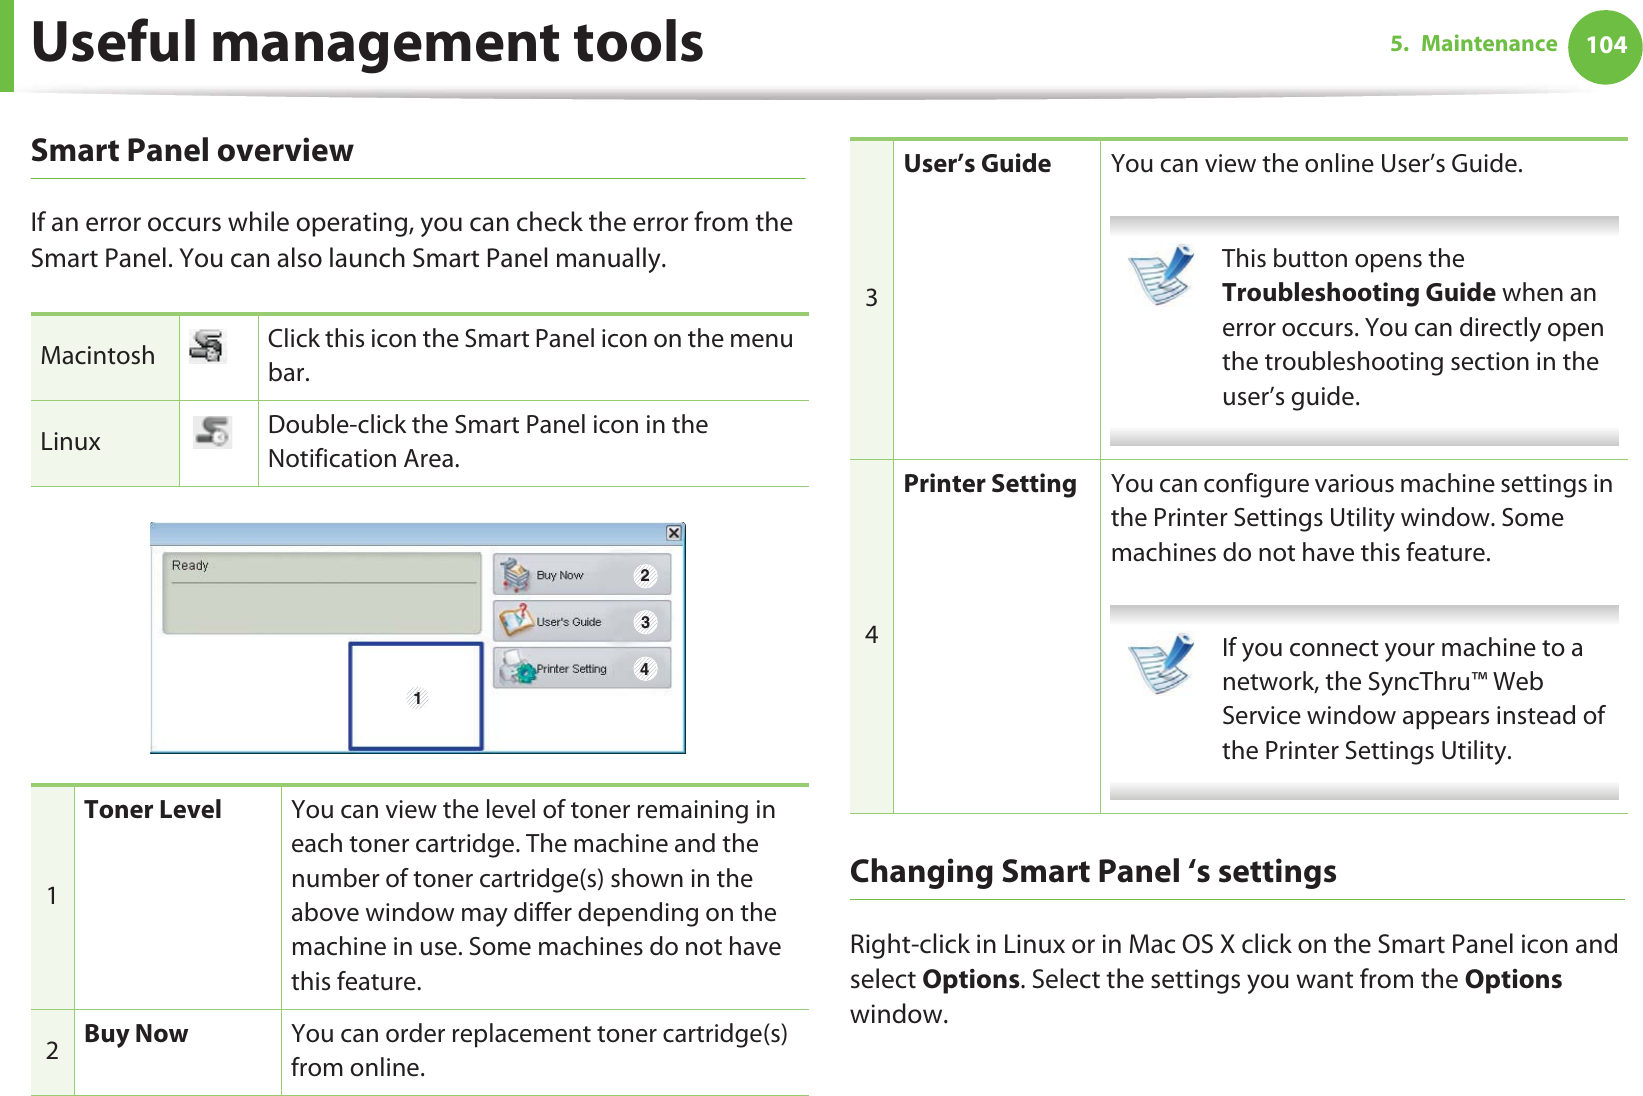 Useful management tools 1045. MaintenanceSmart Panel overviewIf an error occurs while operating, you can check the error from the Smart Panel. You can also launch Smart Panel manually.Changing Smart Panel ‘s settingsRight-click in Linux or in Mac OS X click on the Smart Panel icon and select Options. Select the settings you want from the Options window. Macintosh Click this icon the Smart Panel icon on the menu bar.Linux Double-click the Smart Panel icon in the Notification Area.1Toner Level You can view the level of toner remaining in each toner cartridge. The machine and the number of toner cartridge(s) shown in the above window may differ depending on the machine in use. Some machines do not have this feature.2Buy Now You can order replacement toner cartridge(s) from online.1 2343User’s Guide You can view the online User’s Guide. This button opens the Troubleshooting Guide when an error occurs. You can directly open the troubleshooting section in the user’s guide.  4Printer Setting You can configure various machine settings in the Printer Settings Utility window. Some machines do not have this feature. If you connect your machine to a network, the SyncThru™ Web Service window appears instead of the Printer Settings Utility. 